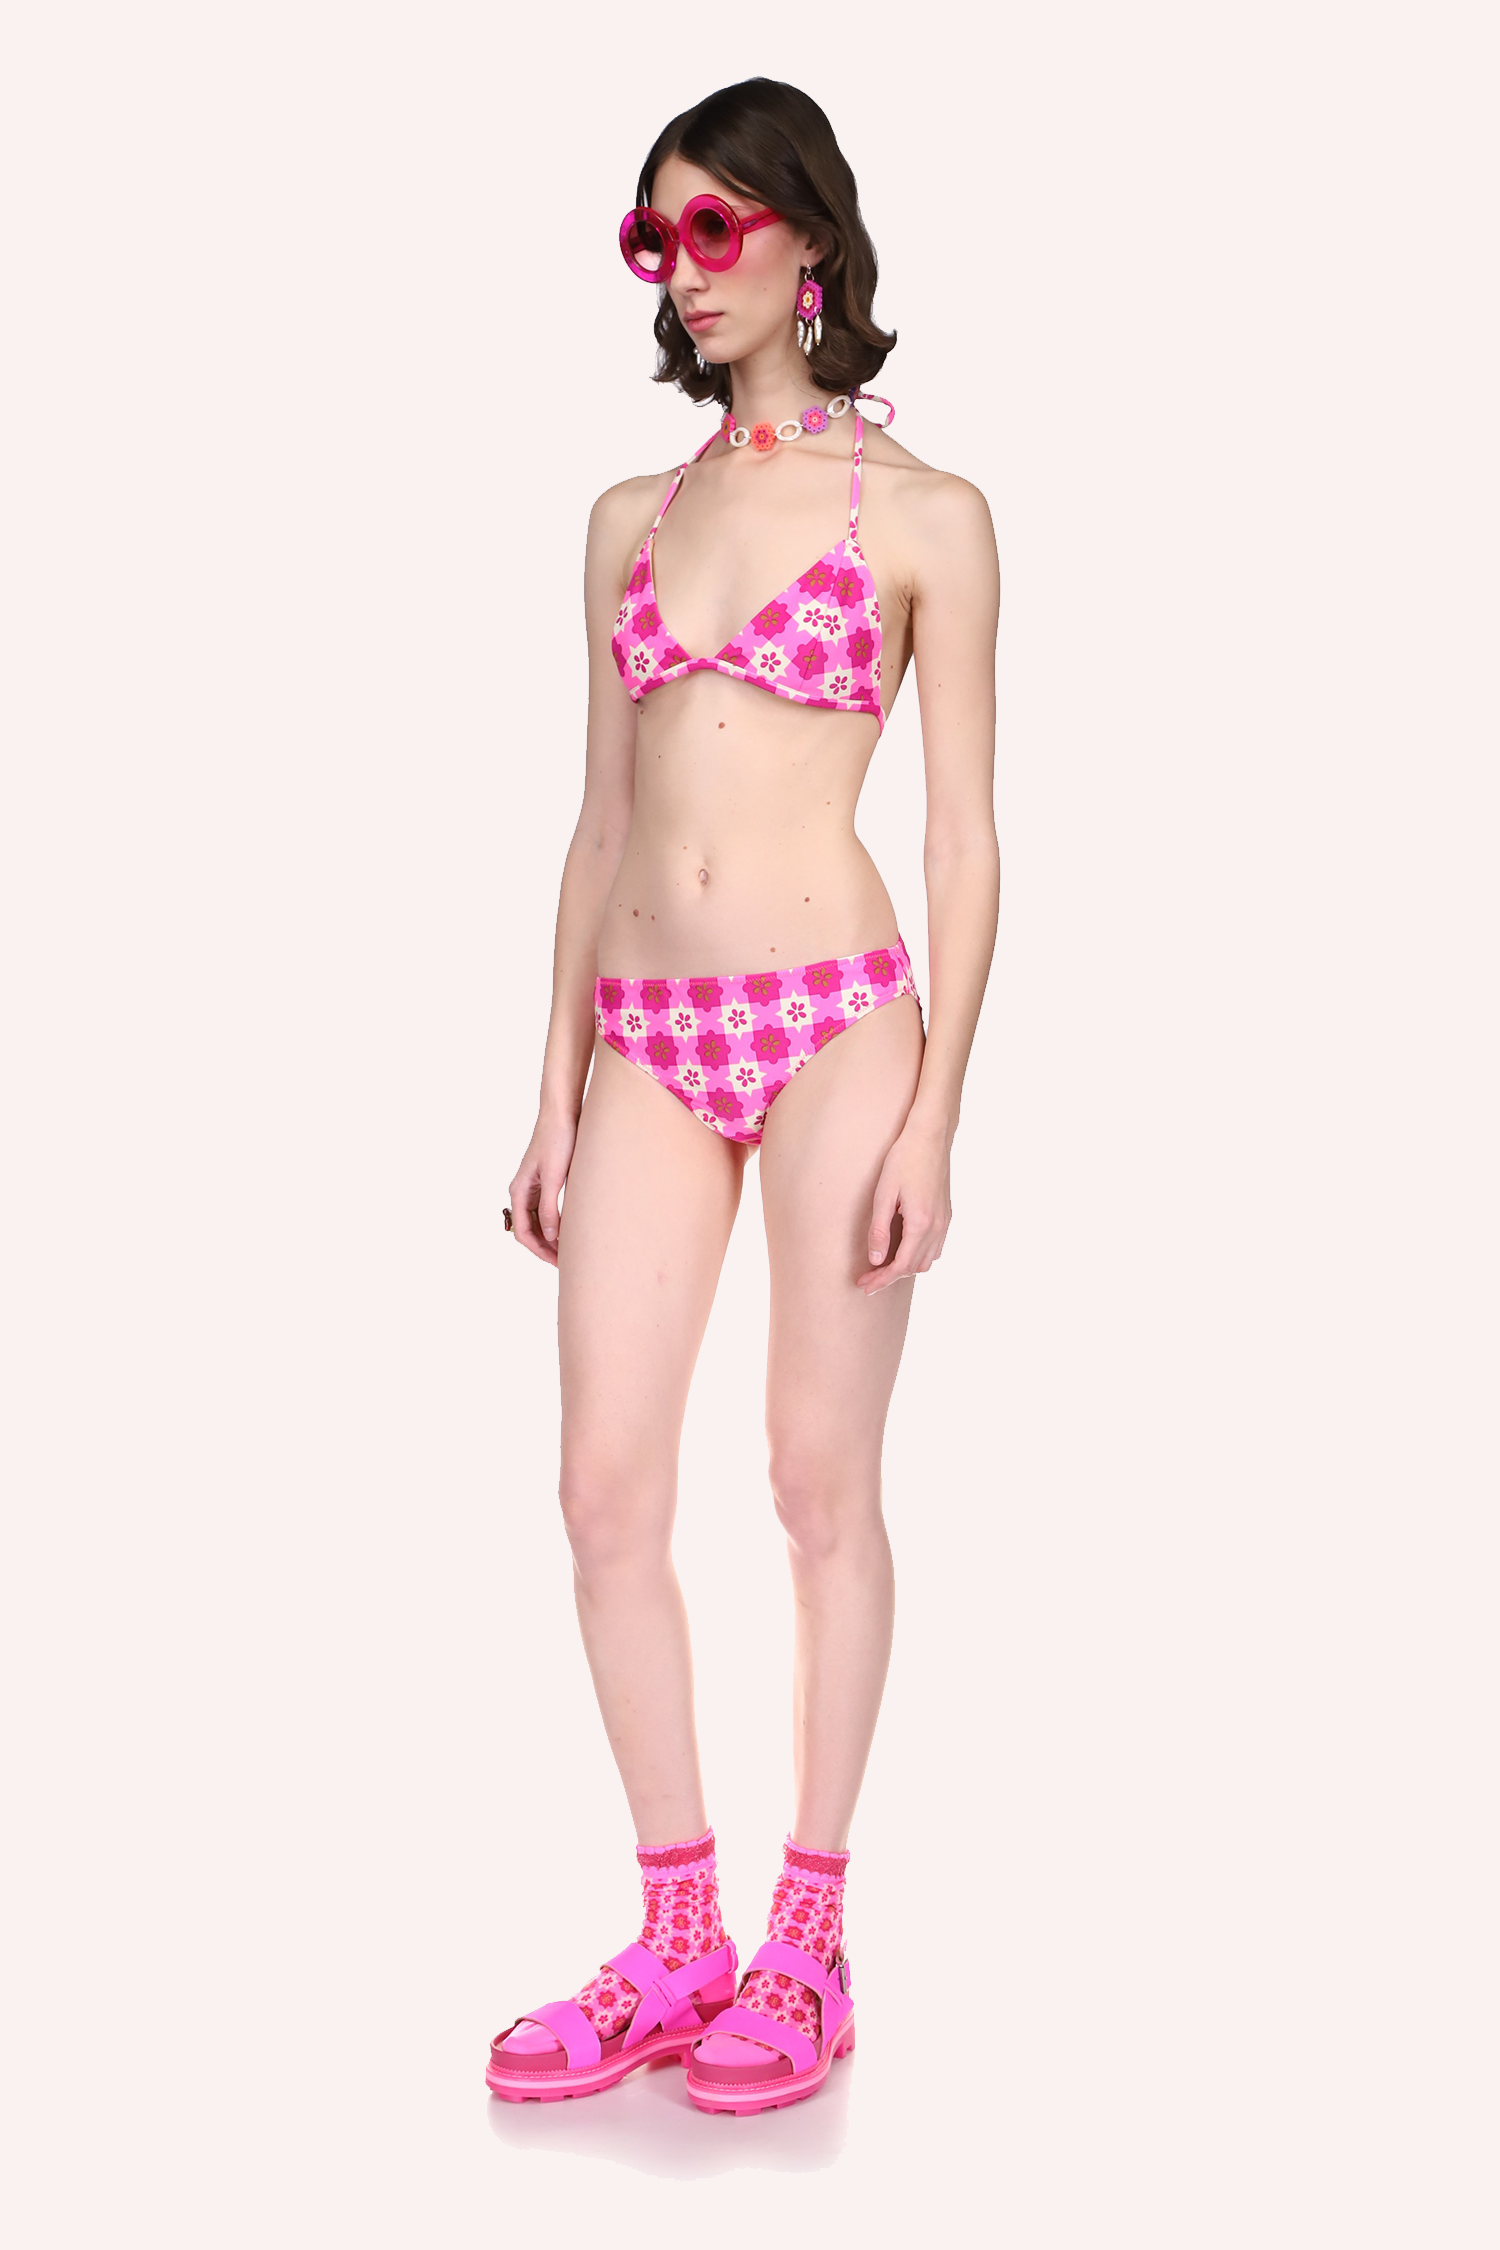 Utopian Gingham Triangle Bikini Set Neon Pink perfect combination for the beach or for being lazy in the sun anywhere.